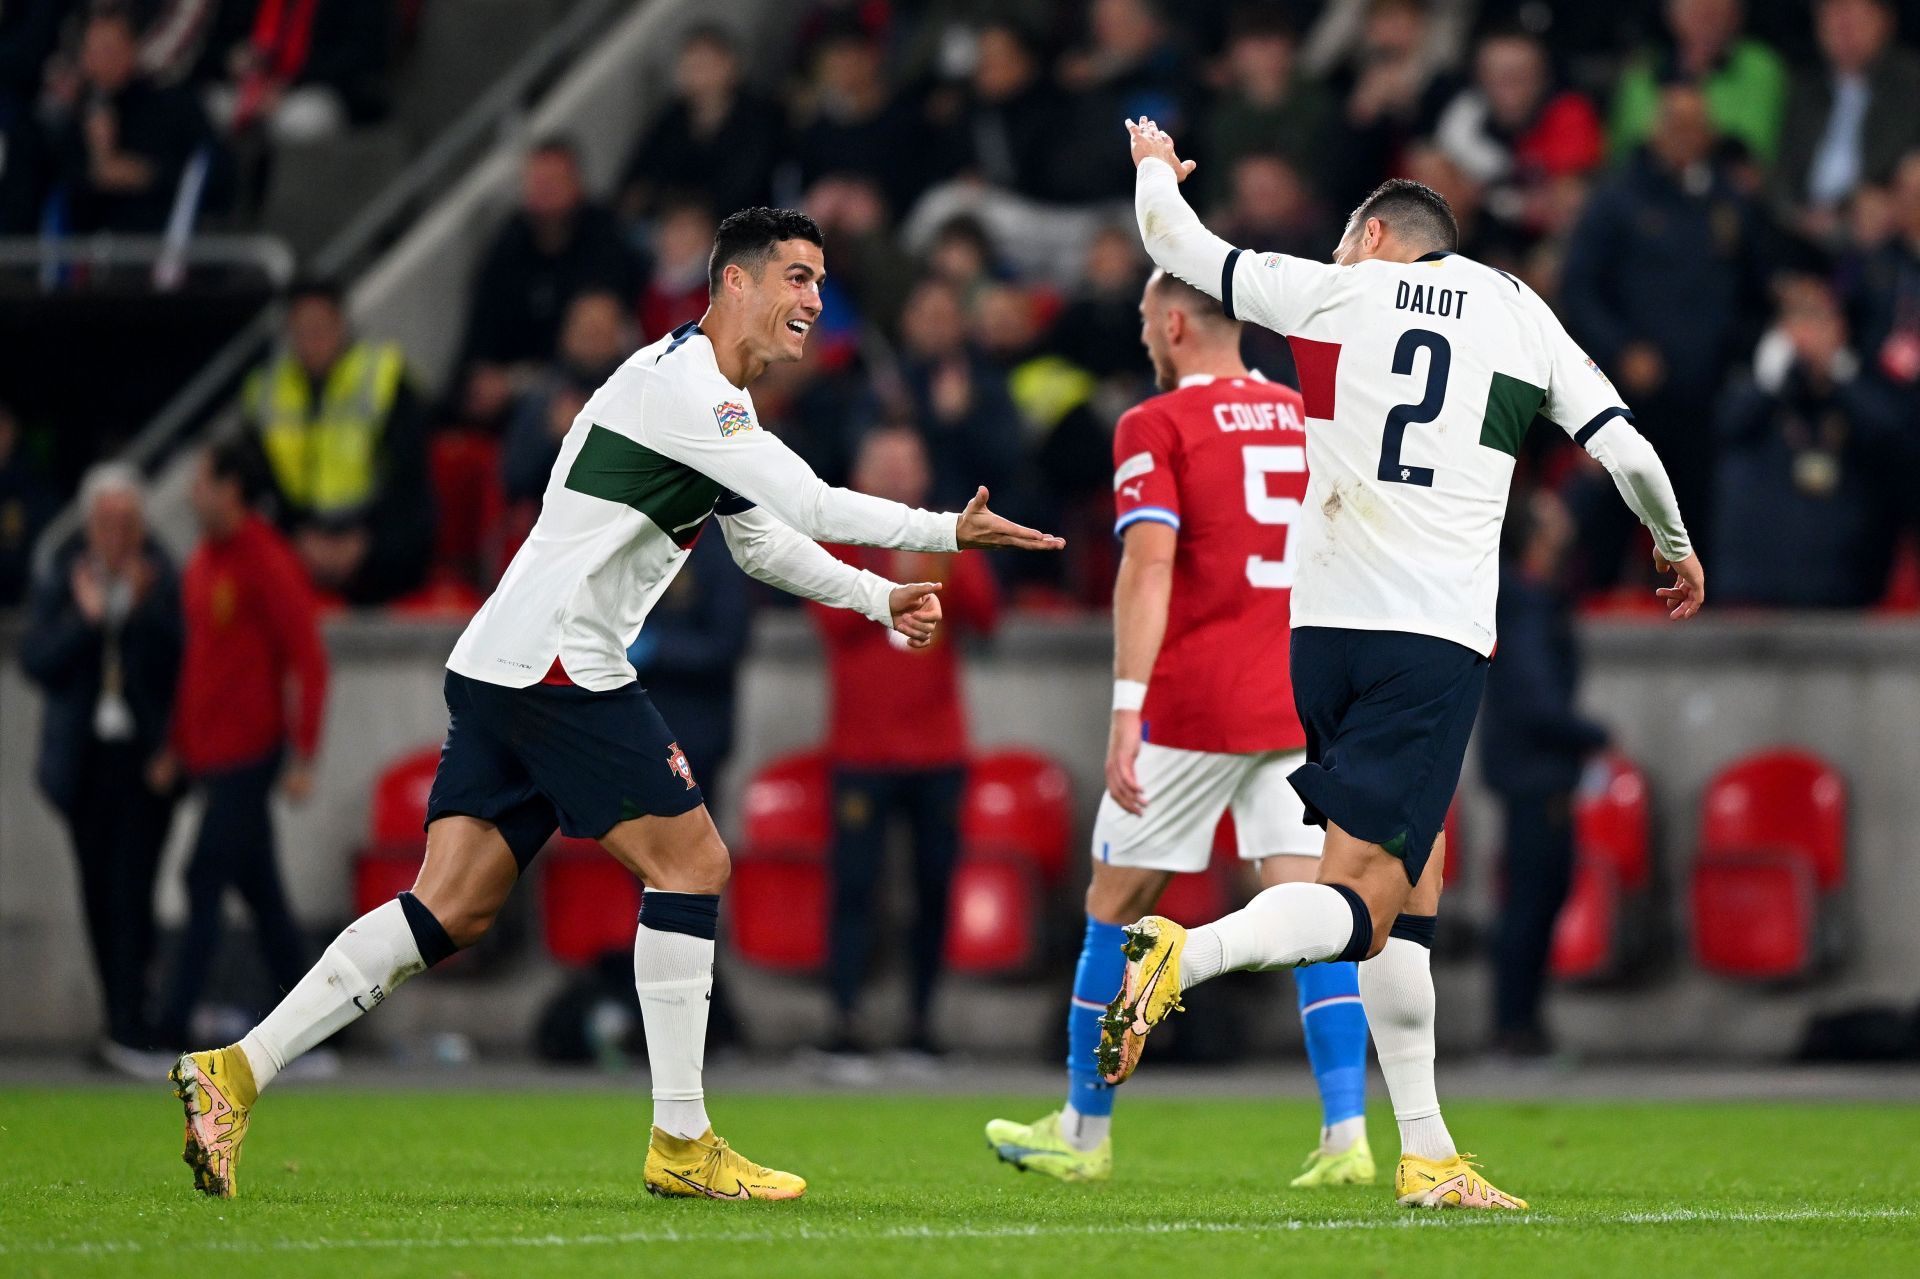 Cristiano Ronaldo and Diogo Dalot have forged a strong bond.